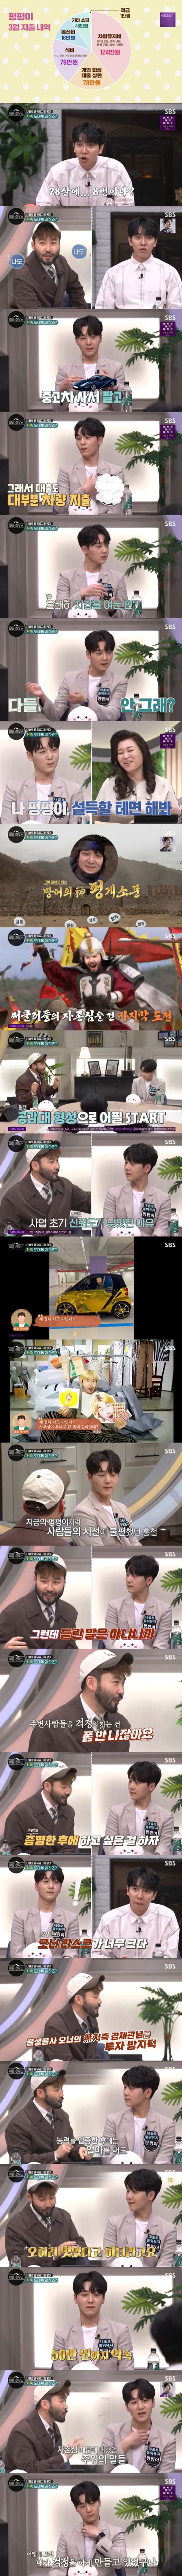 On Circle House, broadcaster Noh Hong-chul gave heartfelt advice to the Capoor who changed their car eight times in total at the age of 28.On SBS Circle House broadcasted on the afternoon of the 7th, it is shit if you care about it. Yolo vs.I have changed my car eight times in the meantime, and I have changed three cars a year.I bought a used car, sold it, sold it, and sold it. MC Noh Hong-chul and Lee Seung-gi were surprised to say, I changed my car more than I have in my whole life.Peng Feng said, To me, tea is a kind of fashion, I spend my dignity on loans, and I got it almost because of cars.I do not want to buy a car, but I am tired of the car I am riding now.  I think others have a look at the persons car and judge it. I was hospitalized for three months in a traffic accident a while ago.The part I realized when I was hurt was I can die tomorrow, and Oh, I will do more then ... I will live a little more fun. The problem of feeding is somehow solved. Peng Peng Yi also said, I do not understand saving because of interest 2%, so I have a savings of 10,000 won. Please persuade me about the need for saving.Noh Hong-chul said, We seem to be similar, where I was in my 20s, and I was representing something, and I was in charge of policy.But I was very low in confidence when I went out, because I was riding in a light vehicle and my office was on one side of the post office.It is not wrong to say that you are riding a foreign car because of others eyes.However, the words of the aides who do for me, such as I have to save, made me think that I am making people around me too hard at some point.Im not sure Im worried about people around me. So I decided to change my goals.I thought that if I was a little more greedy, I would have to do my car, not my debt, and I would do everything I wanted to do.I have done so, and even if I did the same thing, if I had been worried about what you were going to do in the past, I was recognized now. Lee Seung-gi also said, If the business is not only with its own money, but it should be invested, if I am an investor, I will not be able to invest in Peng Peng because of the owner risk.I do not want to prove it by car because I do not have enough room. After all, Peng Peng said, Ill try between 10,000 won and 500,000 won in savings. Noh Hong-chul came very close. I hated what people around me said.Im making you worry. Im shamed (embarrassed) now, listening to Noh Hong-chul. Ill live harder in the future.